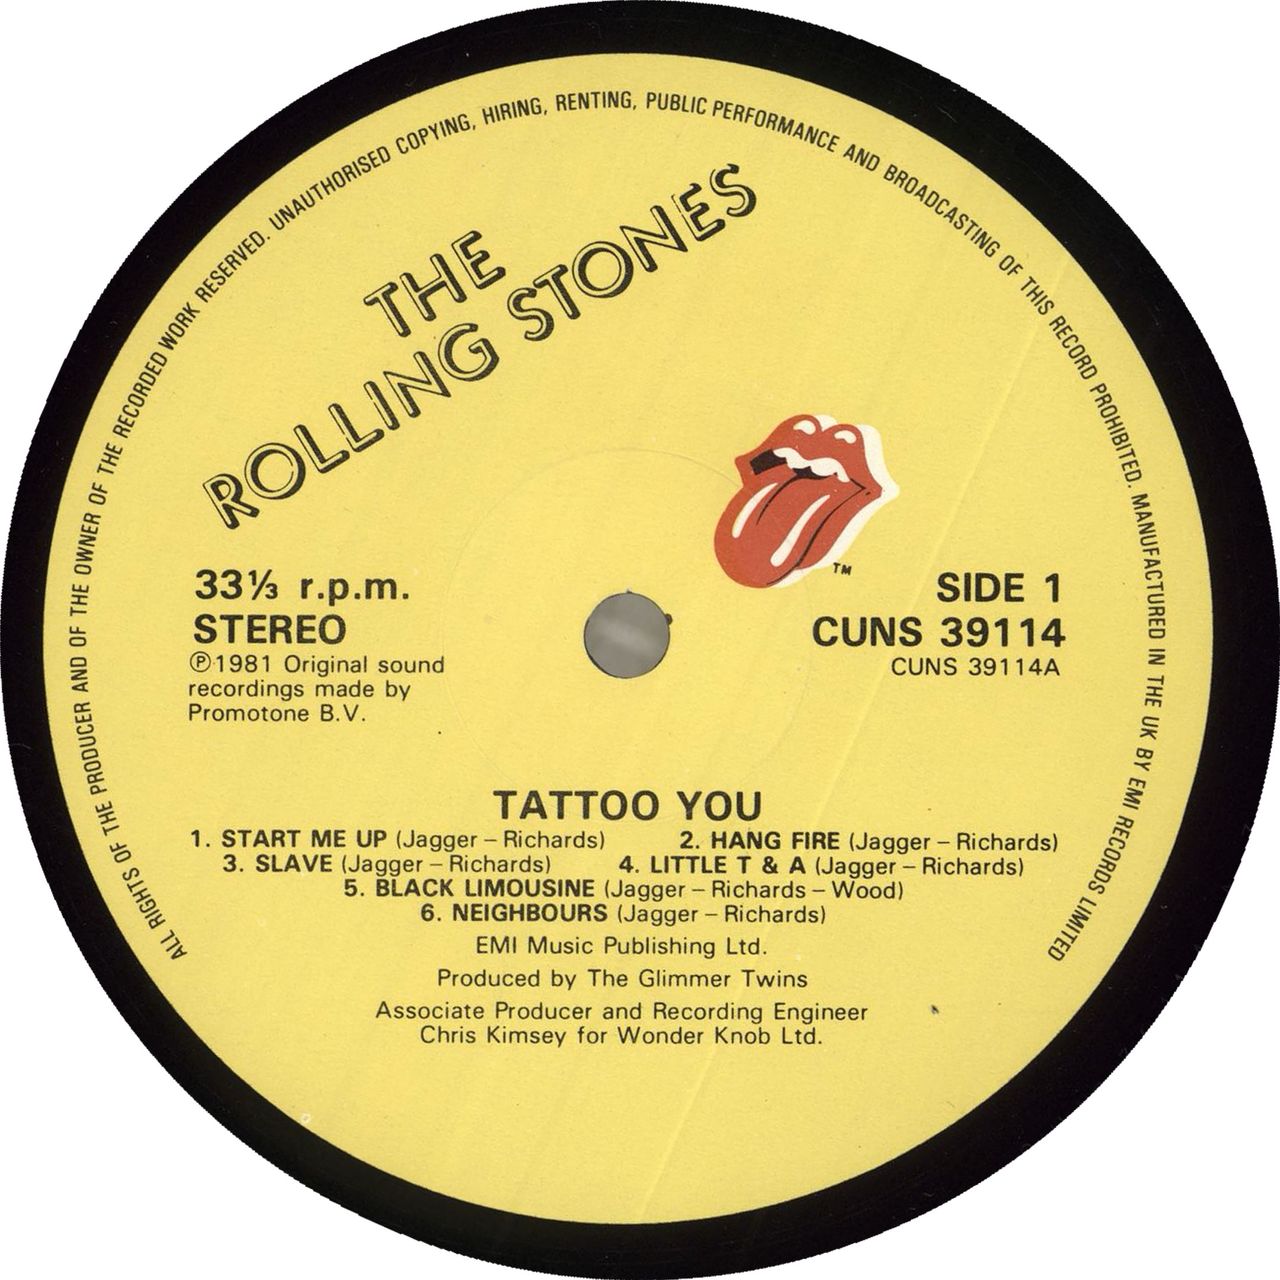 The Rolling Stones Tattoo You 2nd UK Vinyl LP —